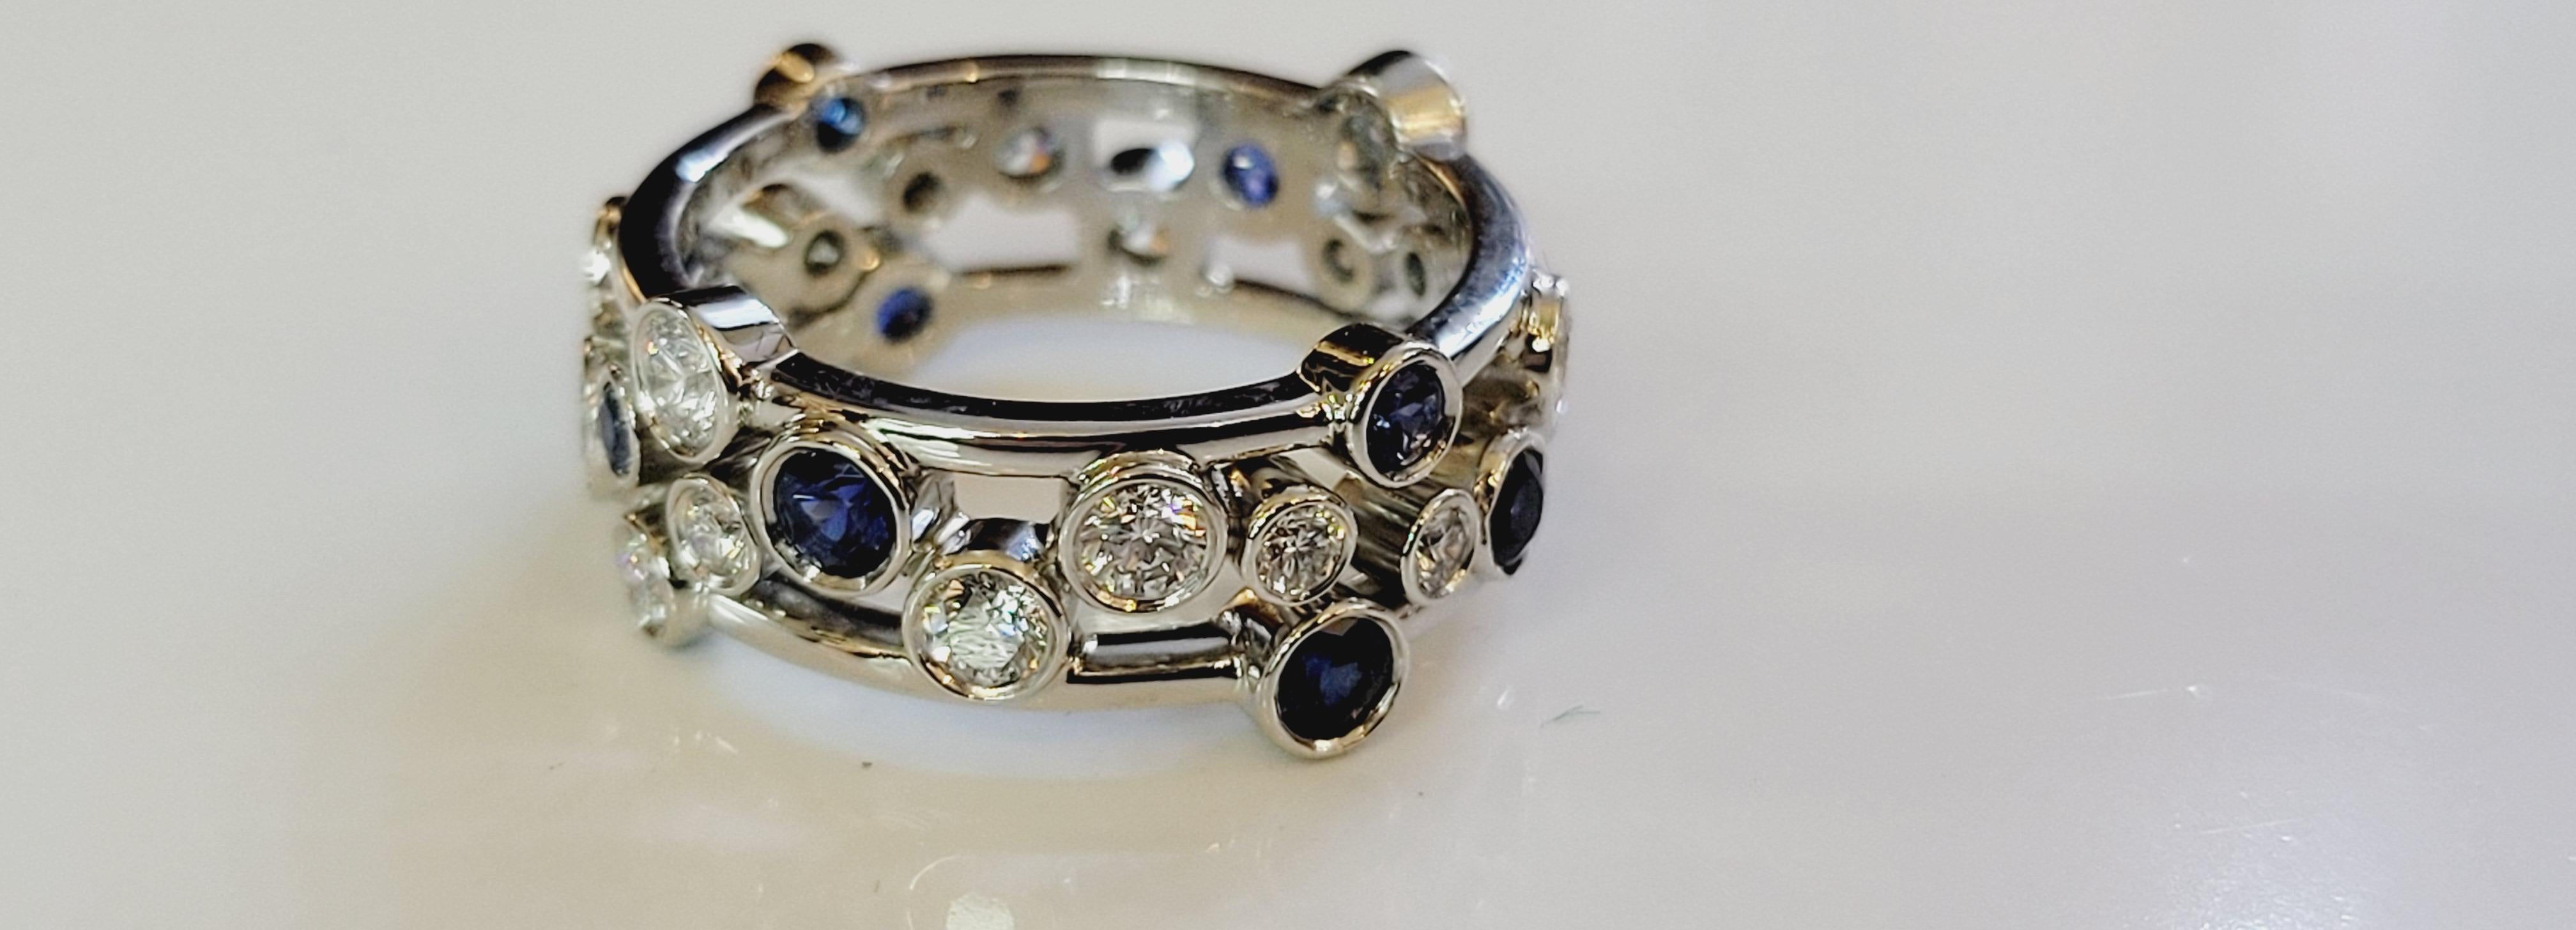  Tiffany & Co Platinum Bubble Diamond Sapphire Ring.
 Made from Solid Platinum 950 and weighs 9.3 grams.
 It holds total of 1.51ct of Natural Round Brilliant Diamonds F Color VS Clarity & Natural Blue Sapphire. 
Ring is a size 6 3/4, and is 8mm